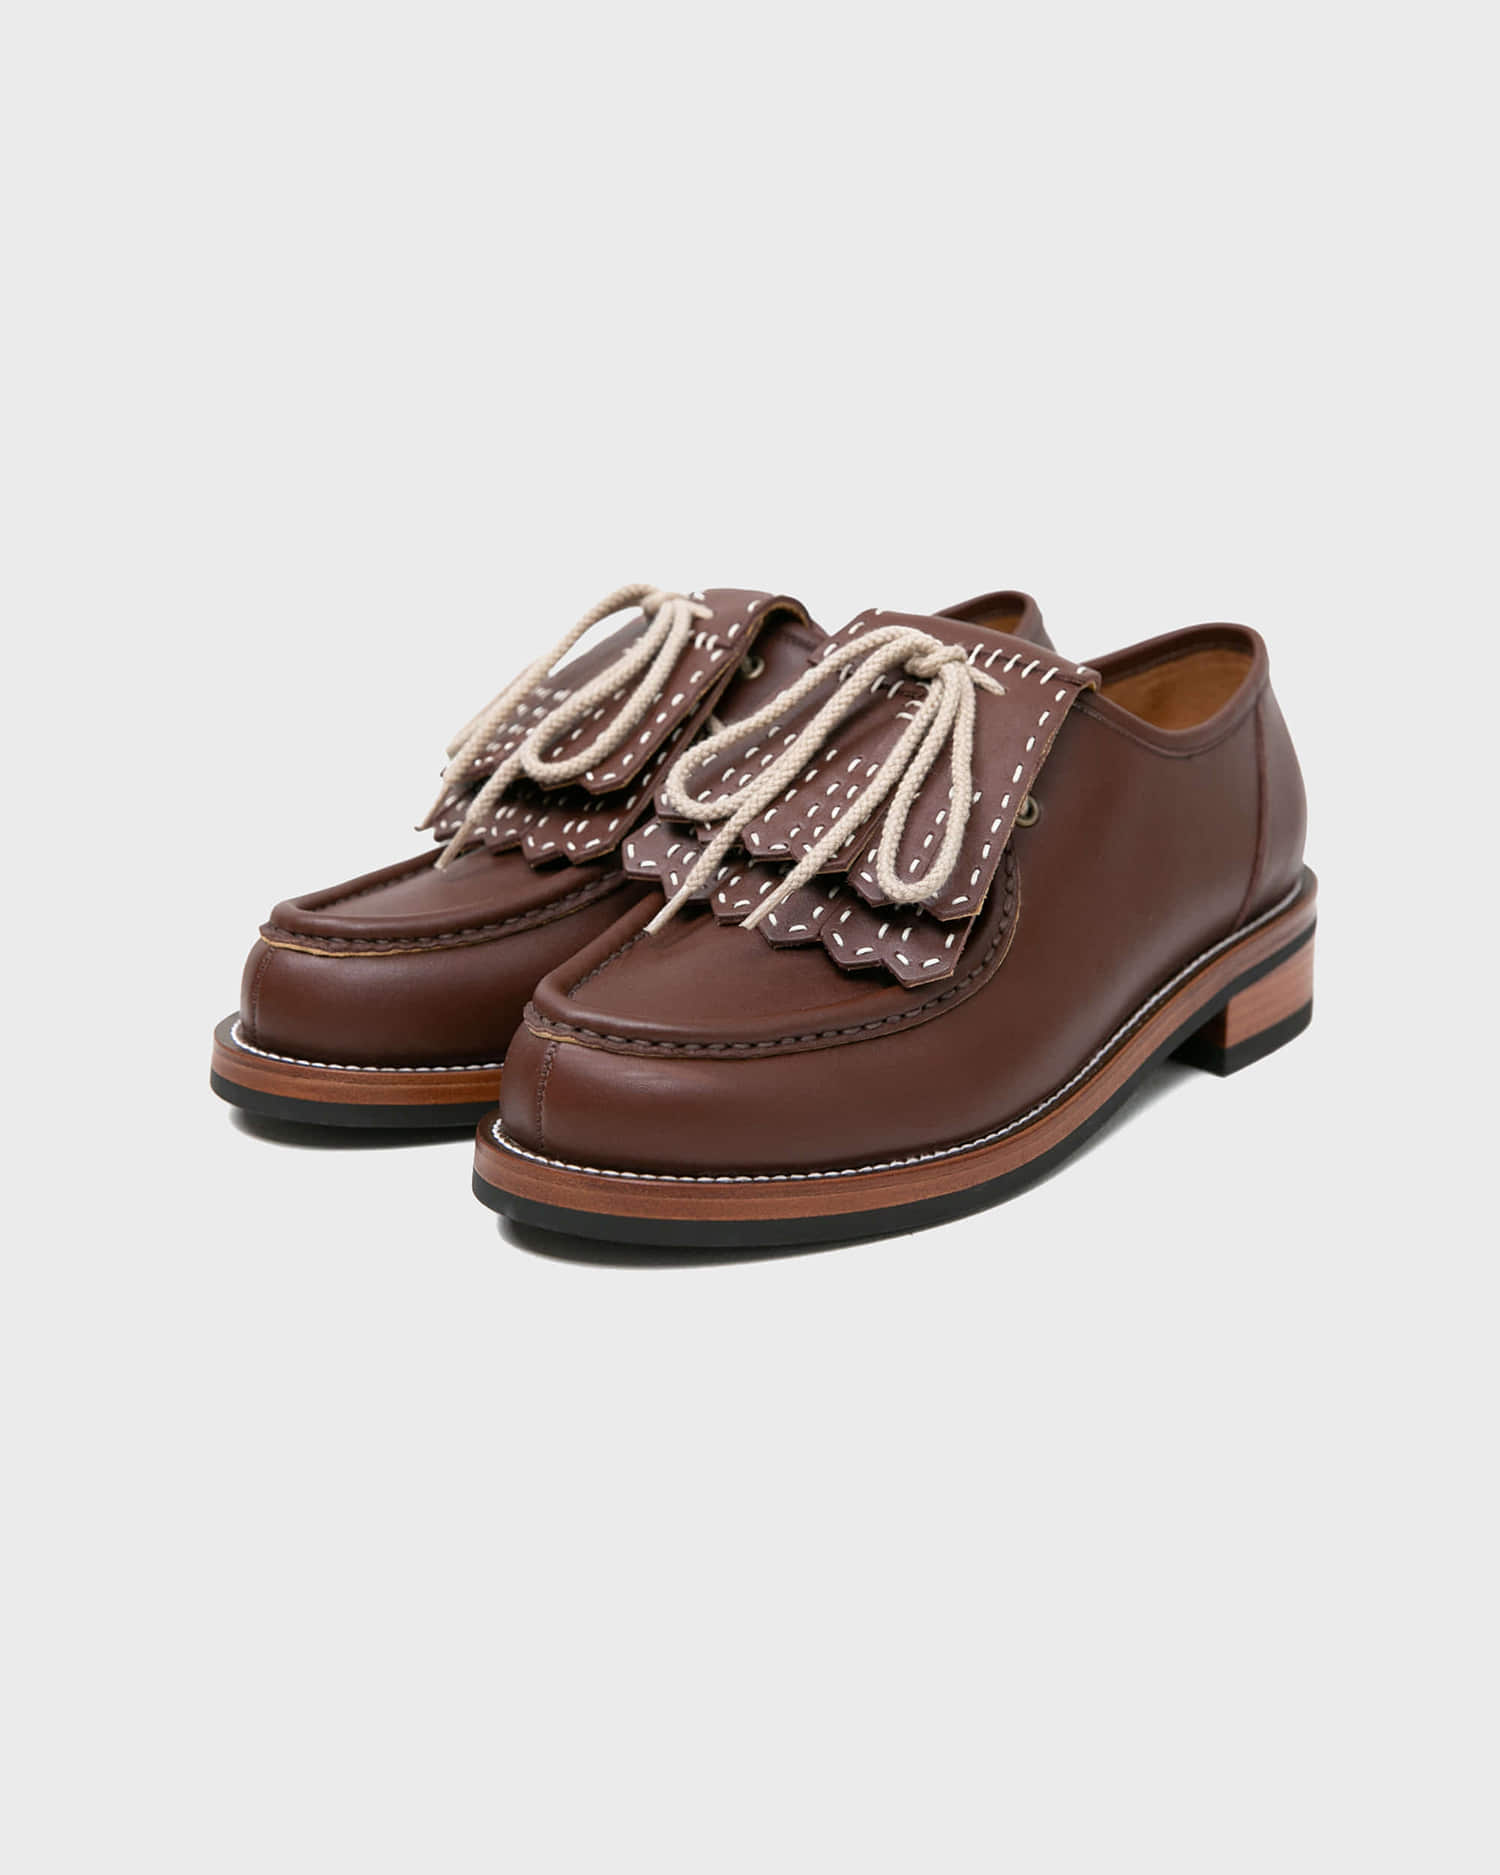 [BILLYS&amp;CO X ANGLAN] Kiltie Tongue Shoes - Brown